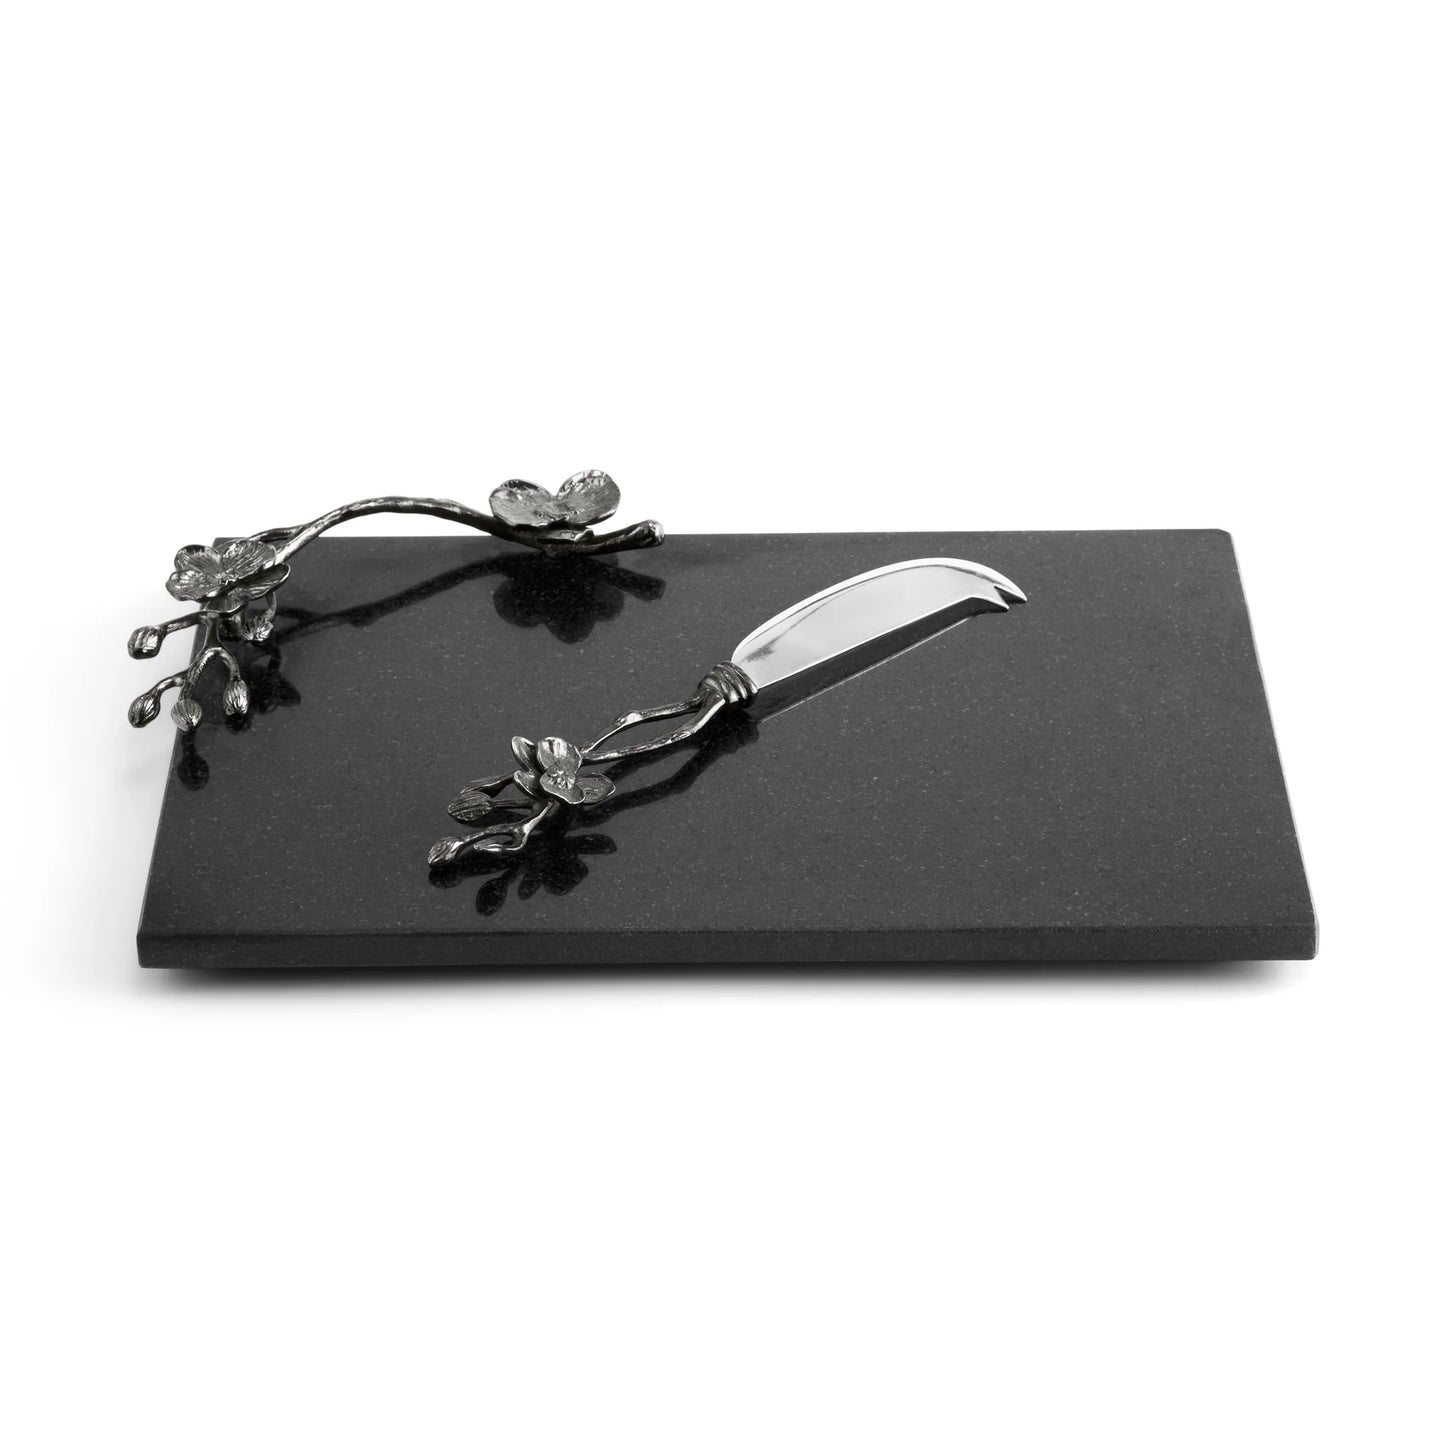 Black Orchid Cheese Board w/ Knife - Small